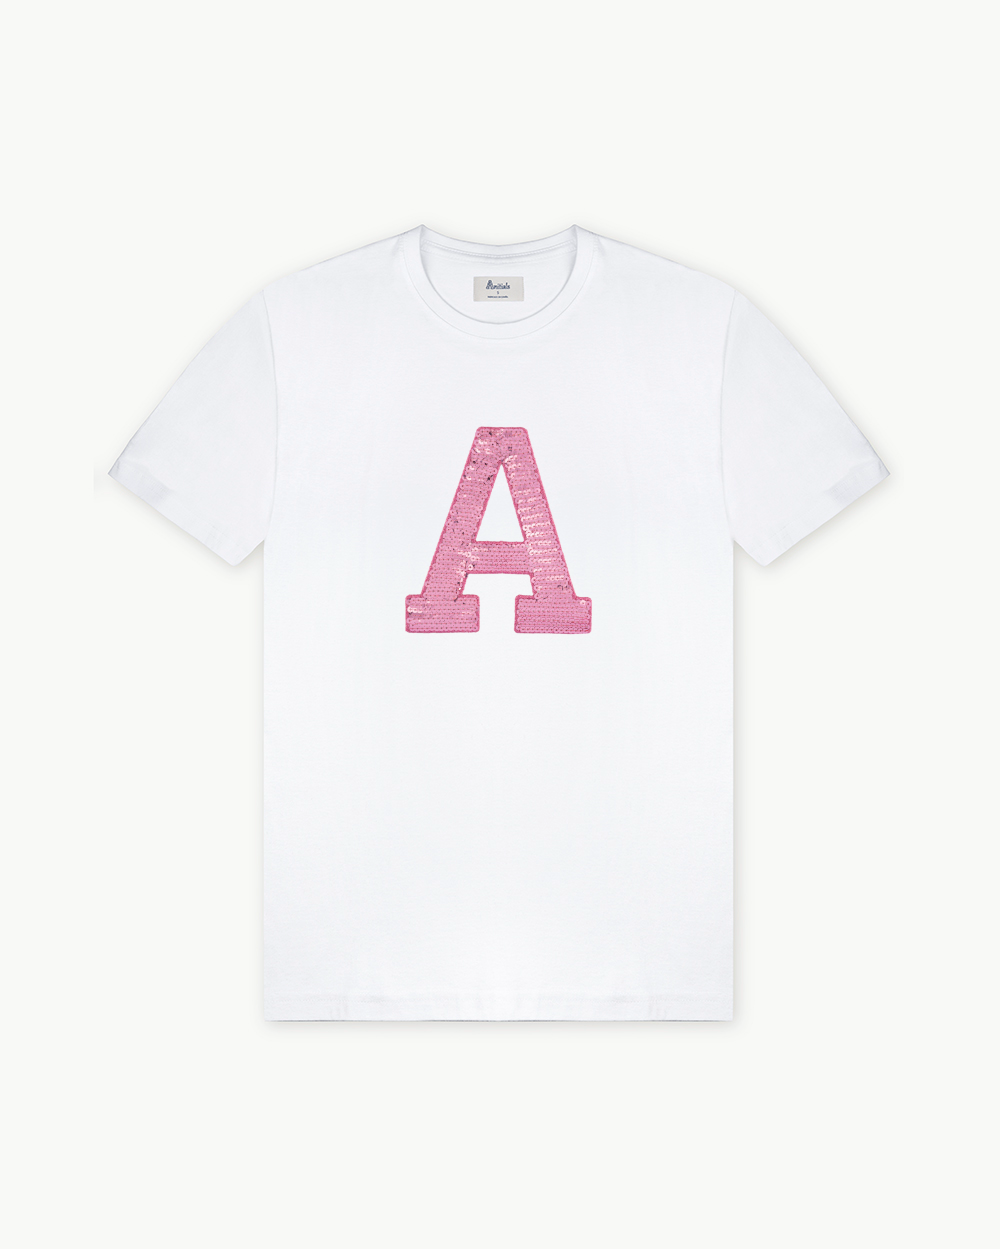 KIDS - WHITE T-SHIRT | INITIAL PINK SEQUINS